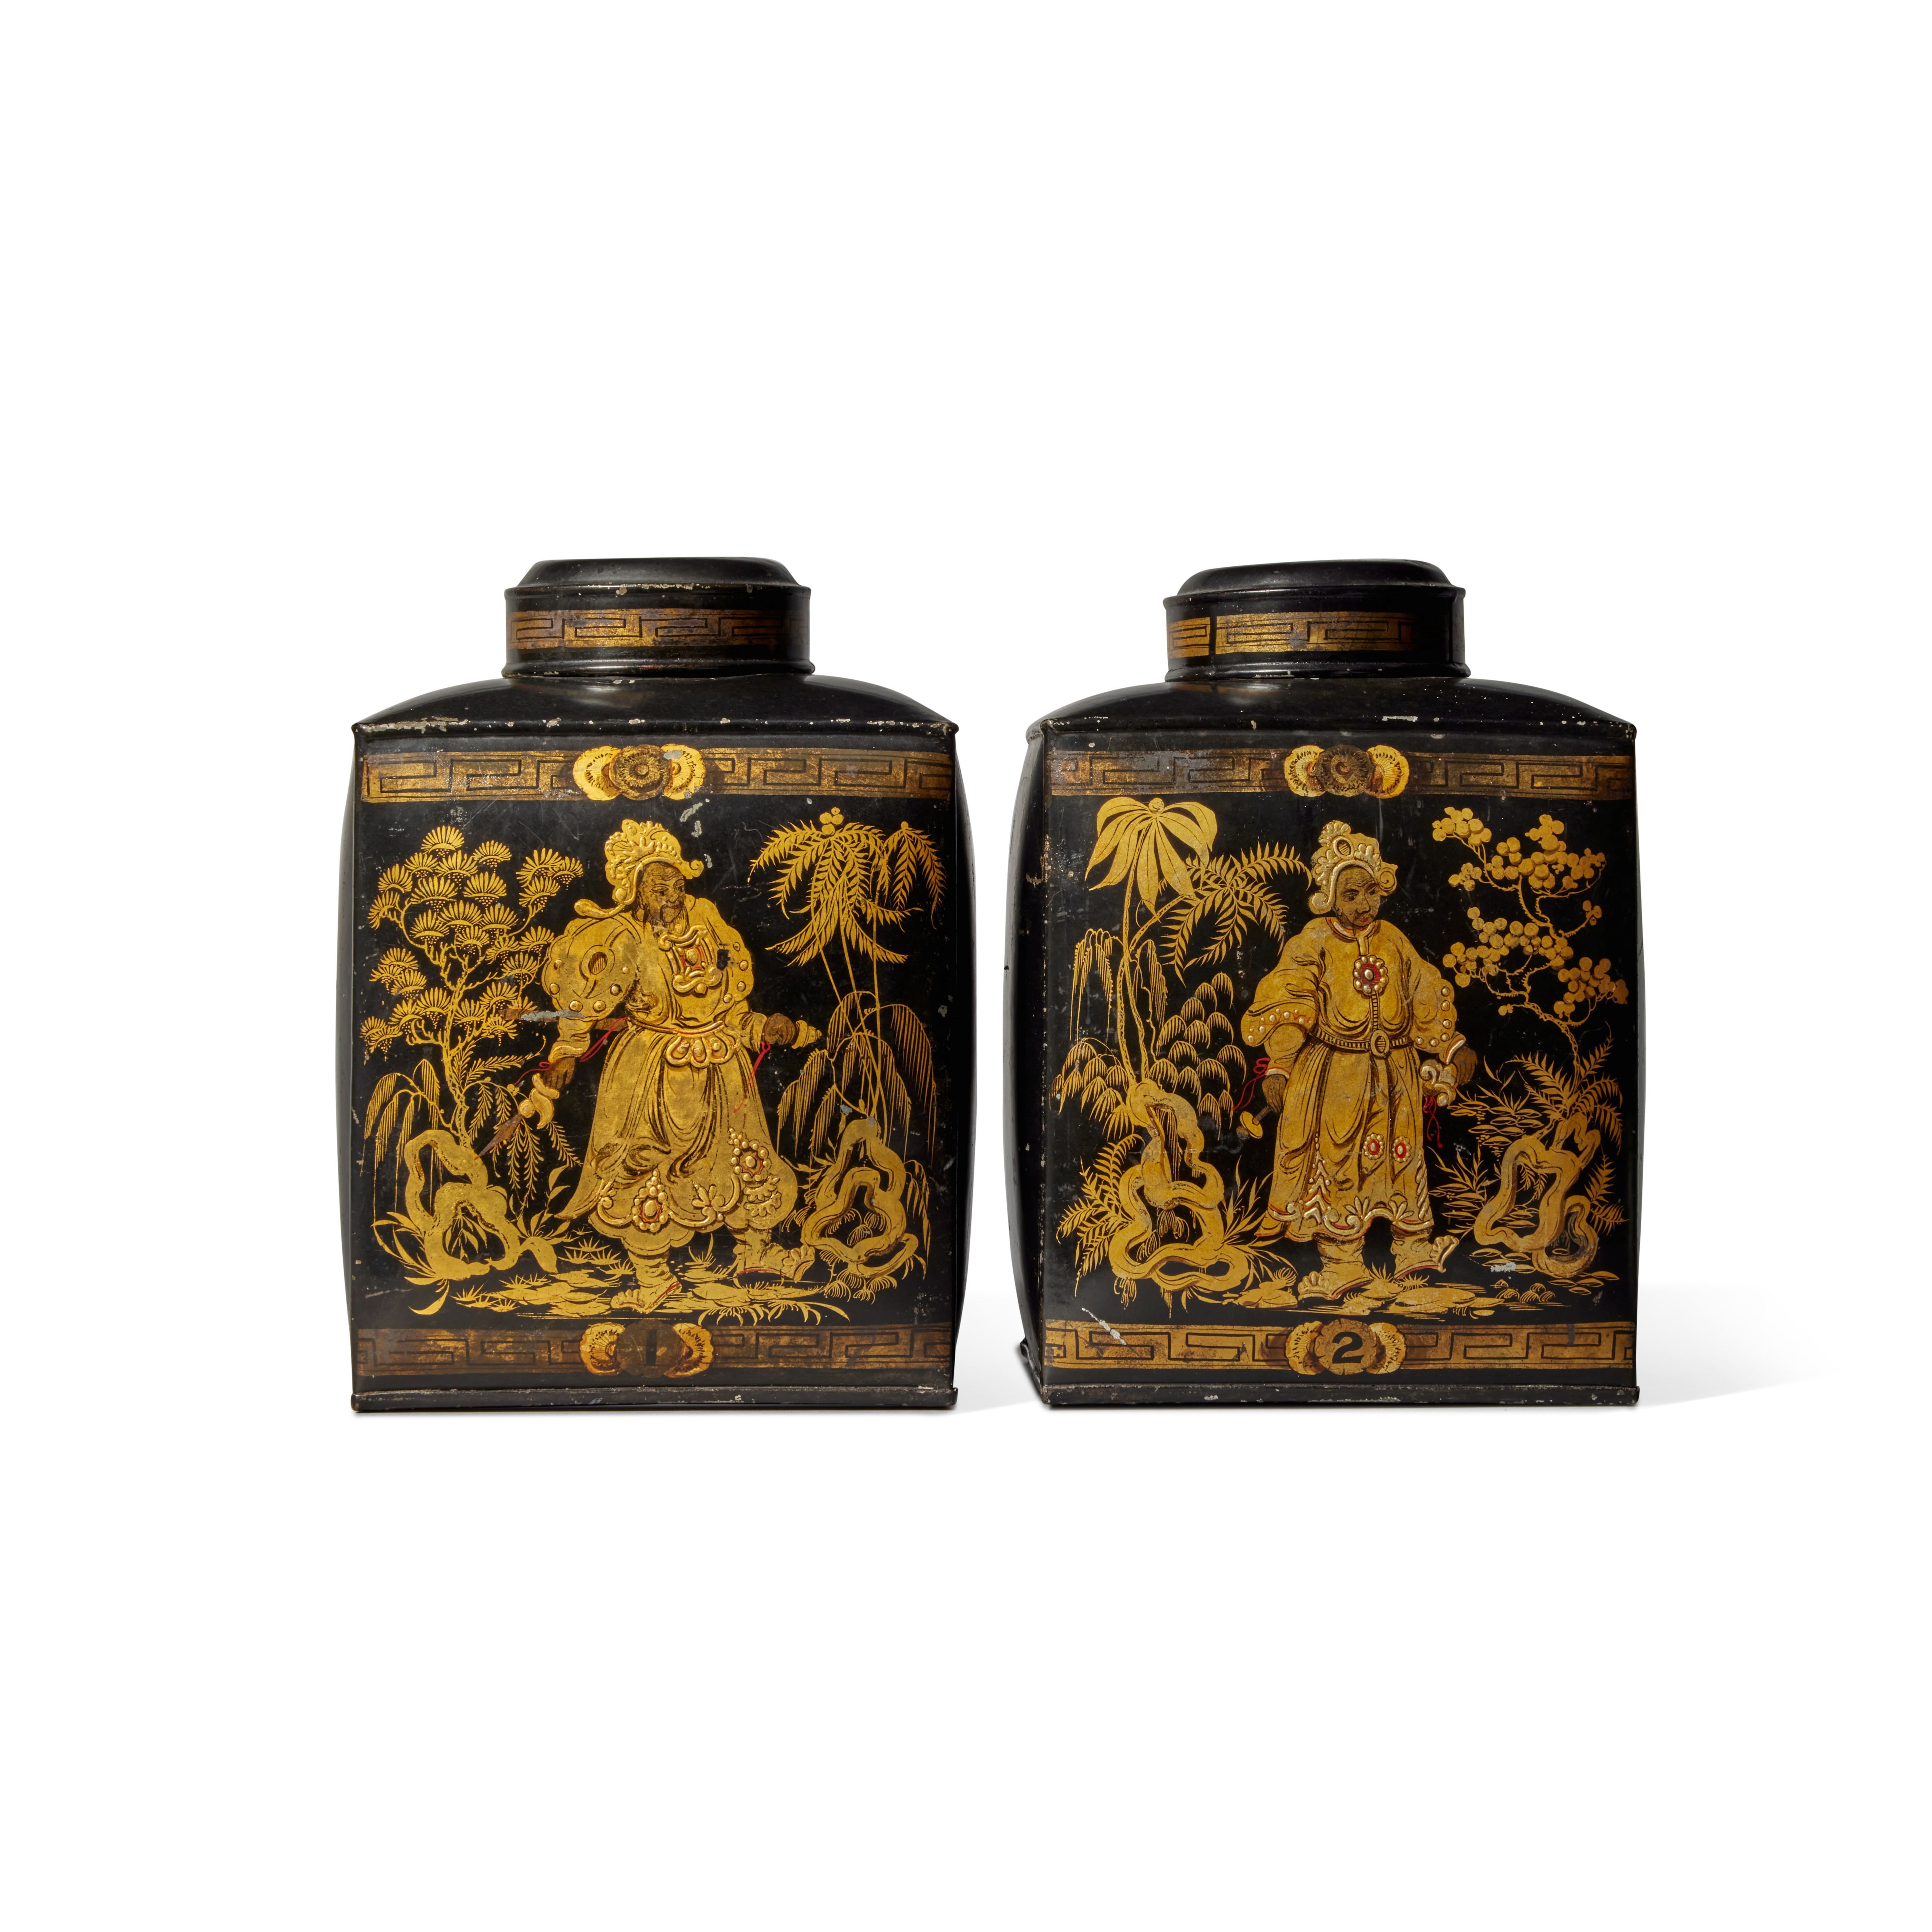 A Pair of Early Victorian Tôle Peinte Tea Canisters and Covers, Circa 1840